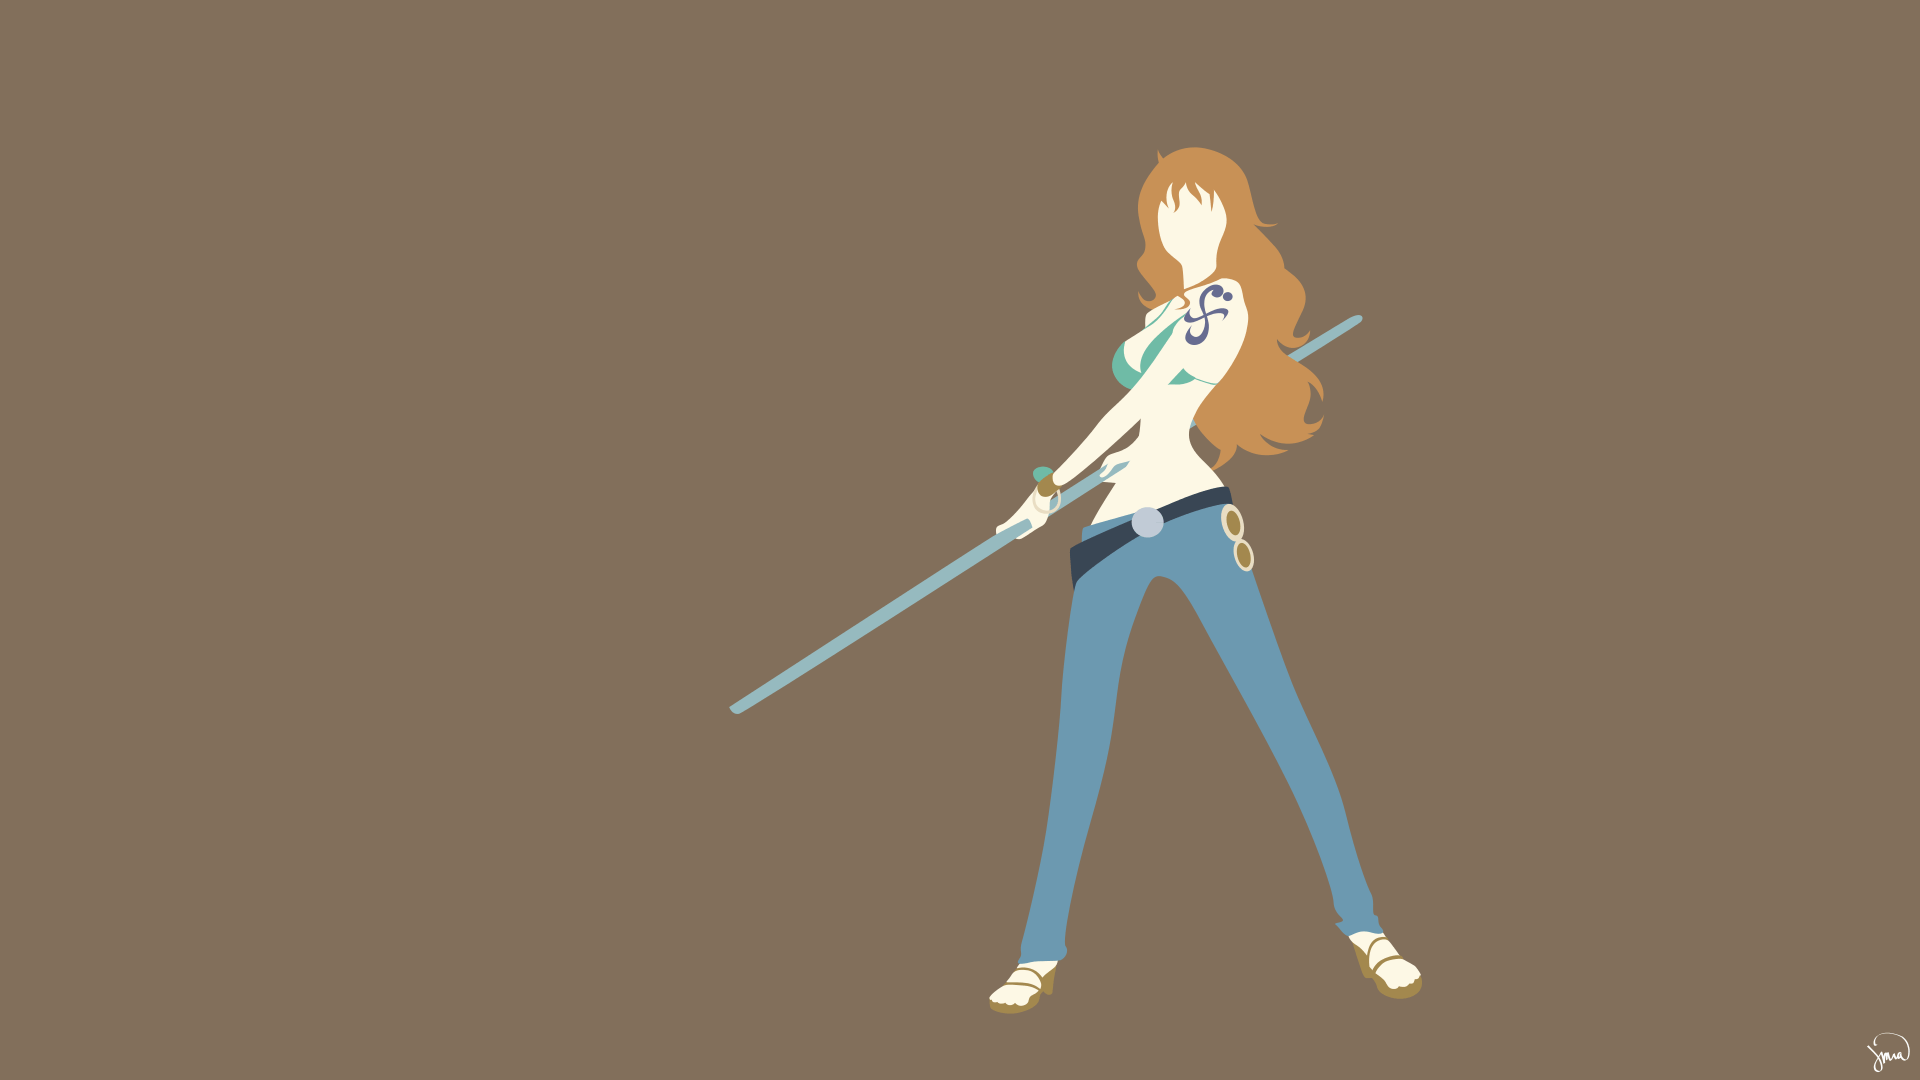 Nami One Piece Wallpaper By Greenmapple17. Daily Anime Art